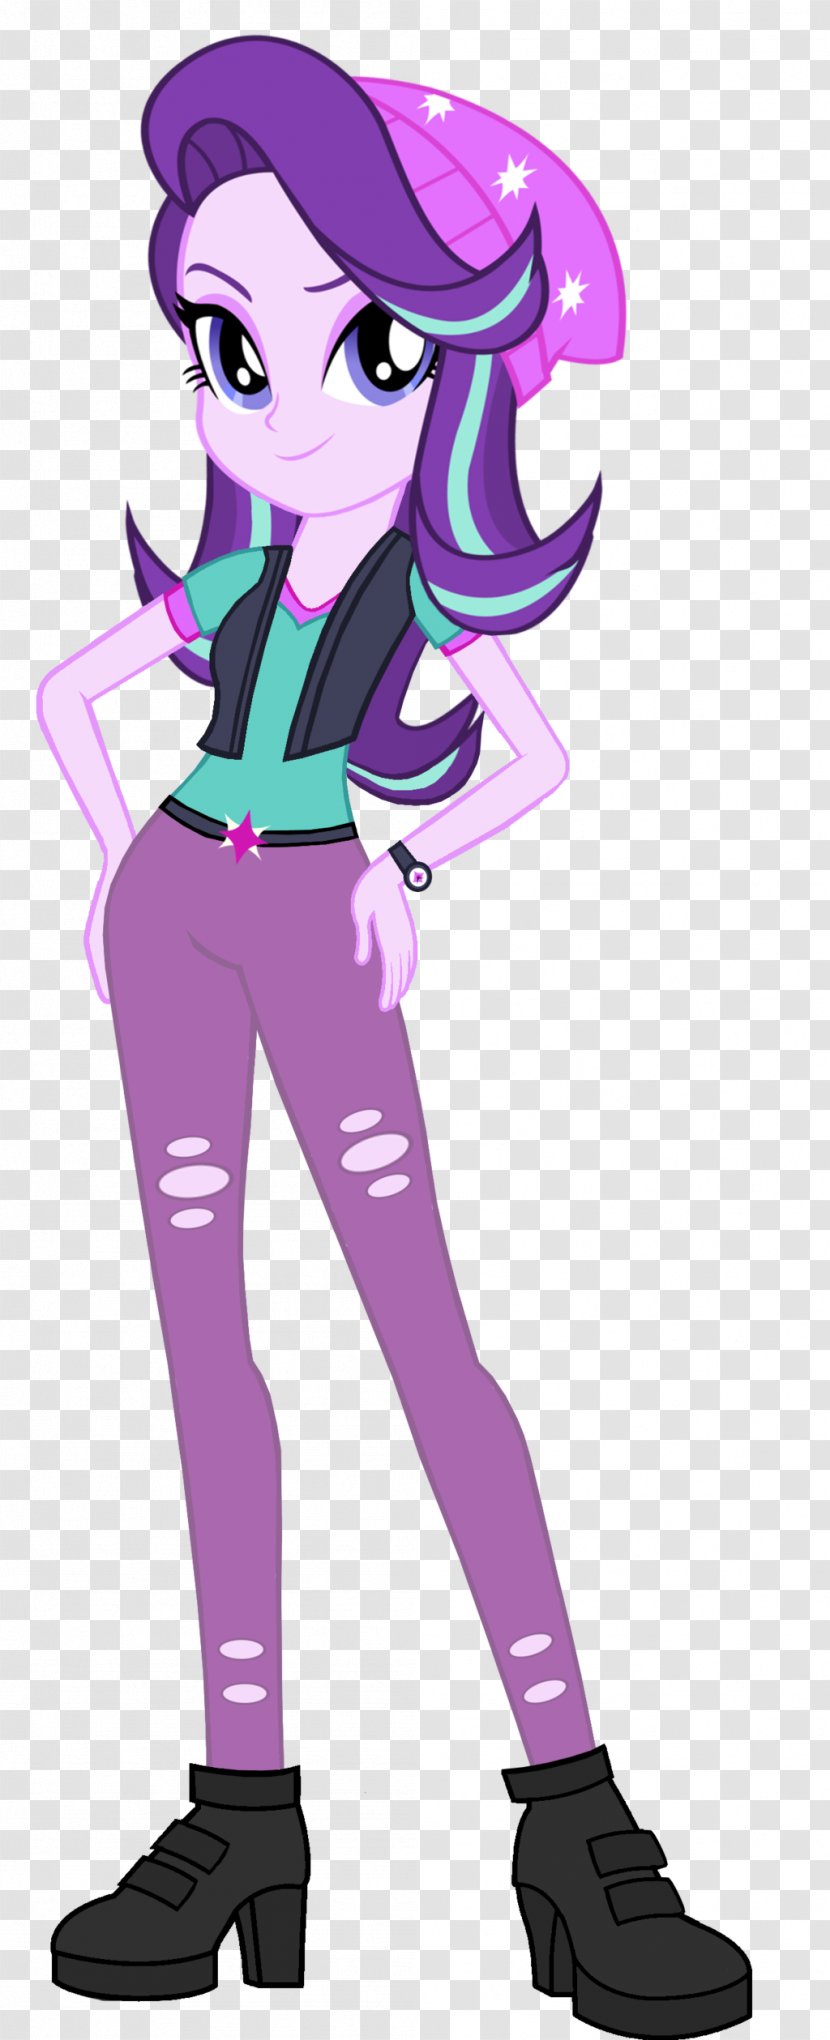 Sunset Shimmer Rainbow Dash Twilight Sparkle My Little Pony: Equestria Girls - Silhouette - Star Light Transparent PNG